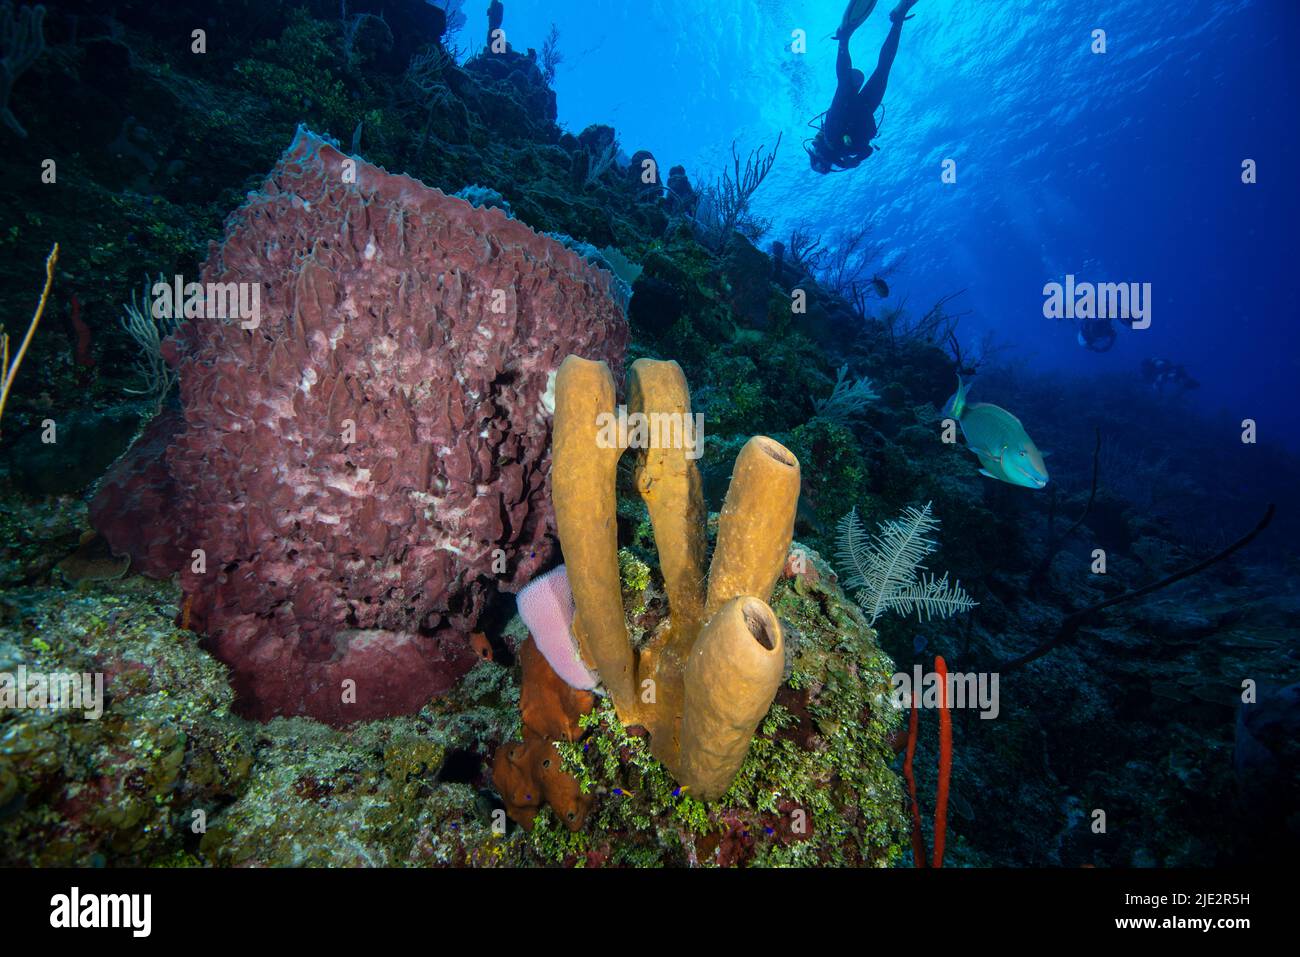 Underwater seascape and marine sponge with a scuba diver in background at Little Cayman Island in the Caribbean. Stock Photo